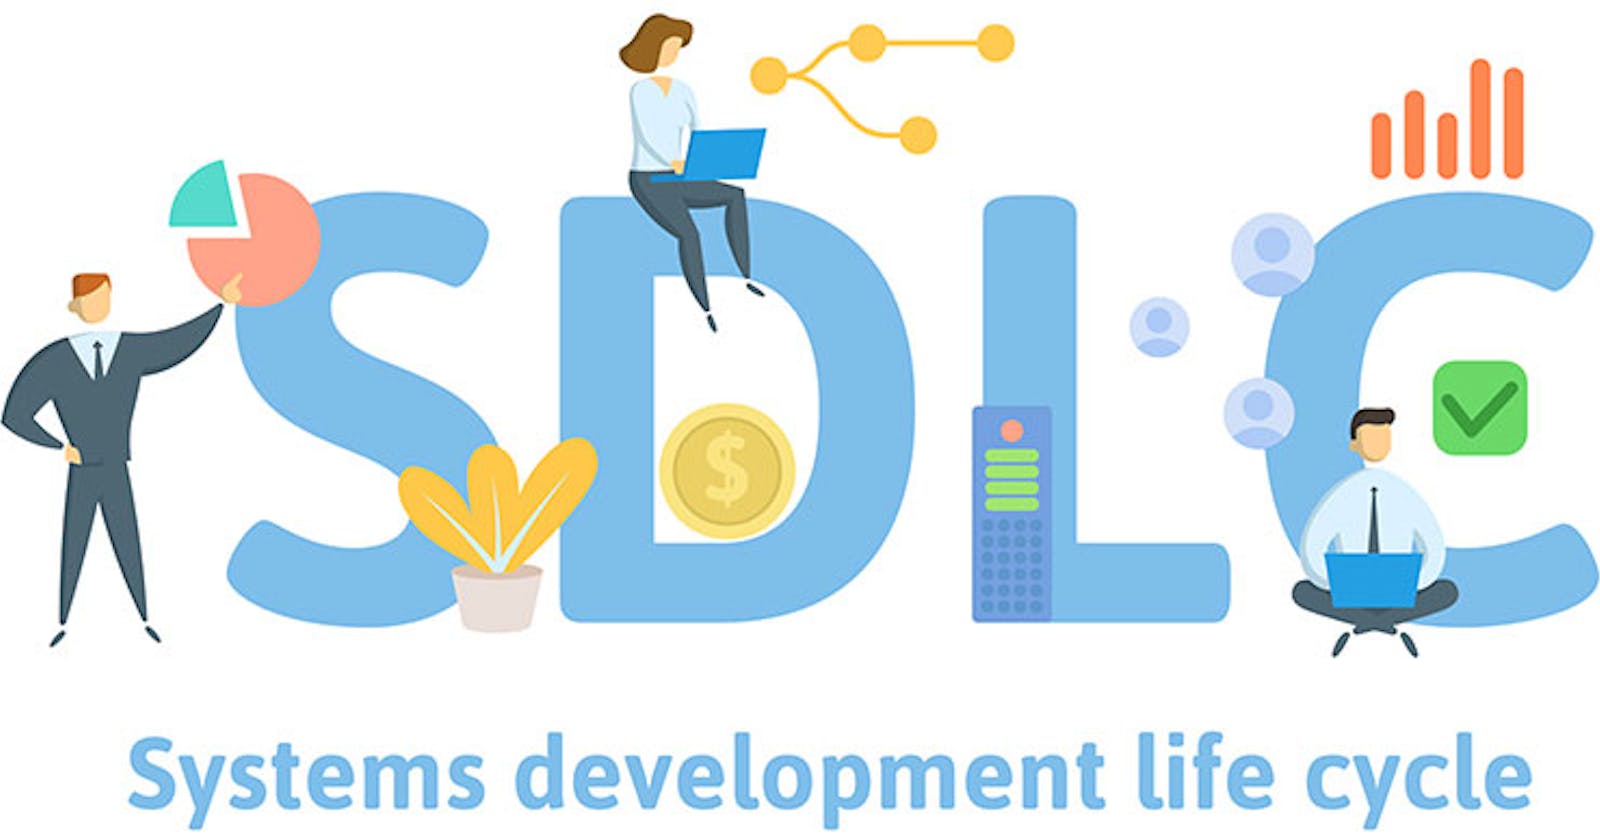 What is SDLC and it's phases?